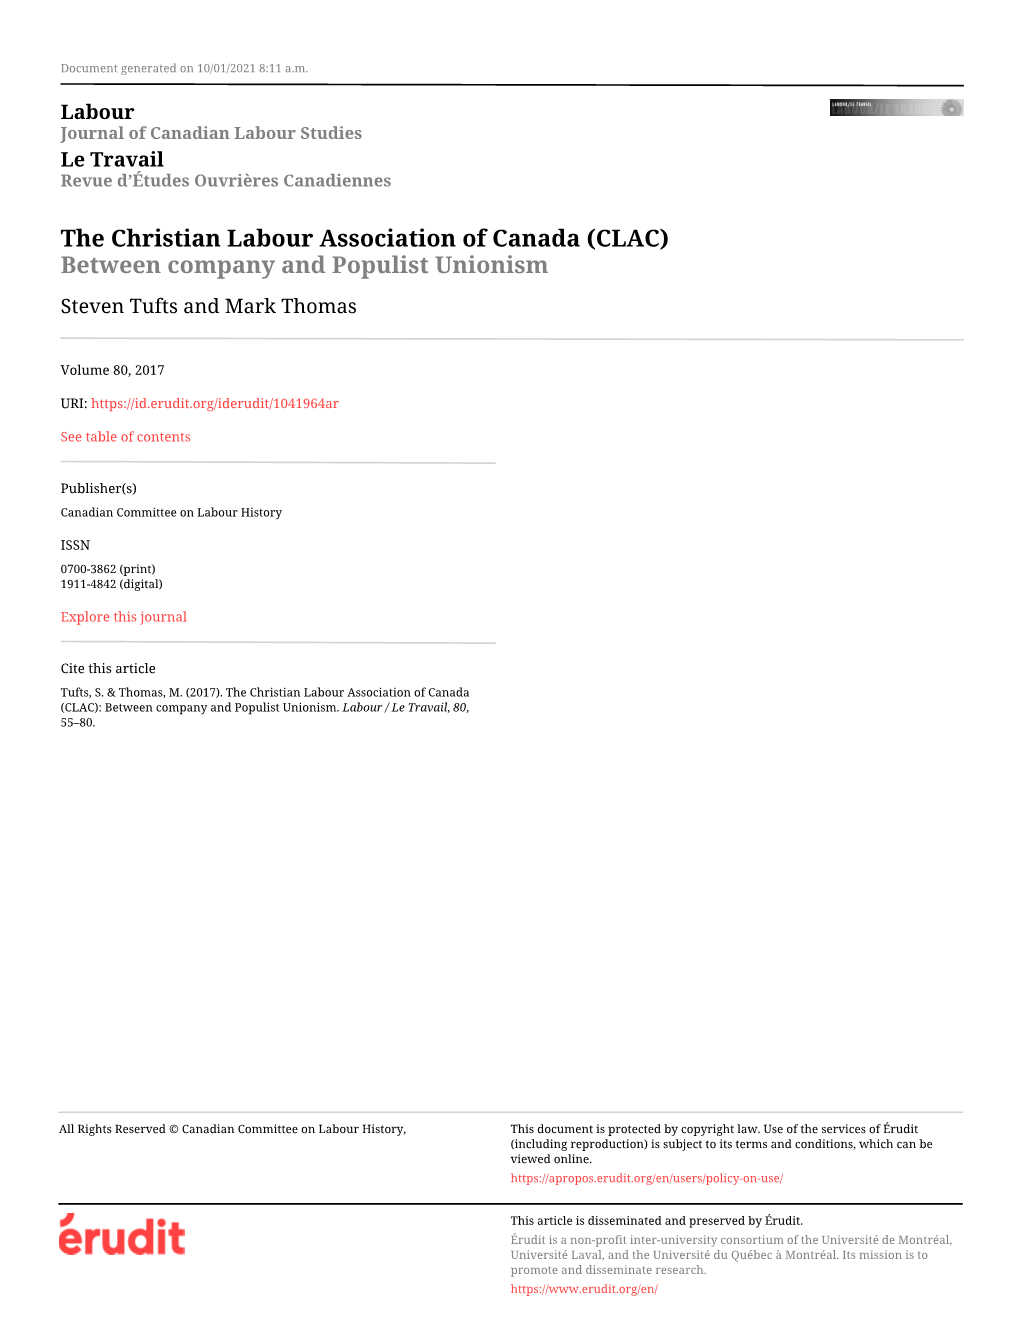 The Christian Labour Association of Canada (CLAC): Between Company and Populist Unionism